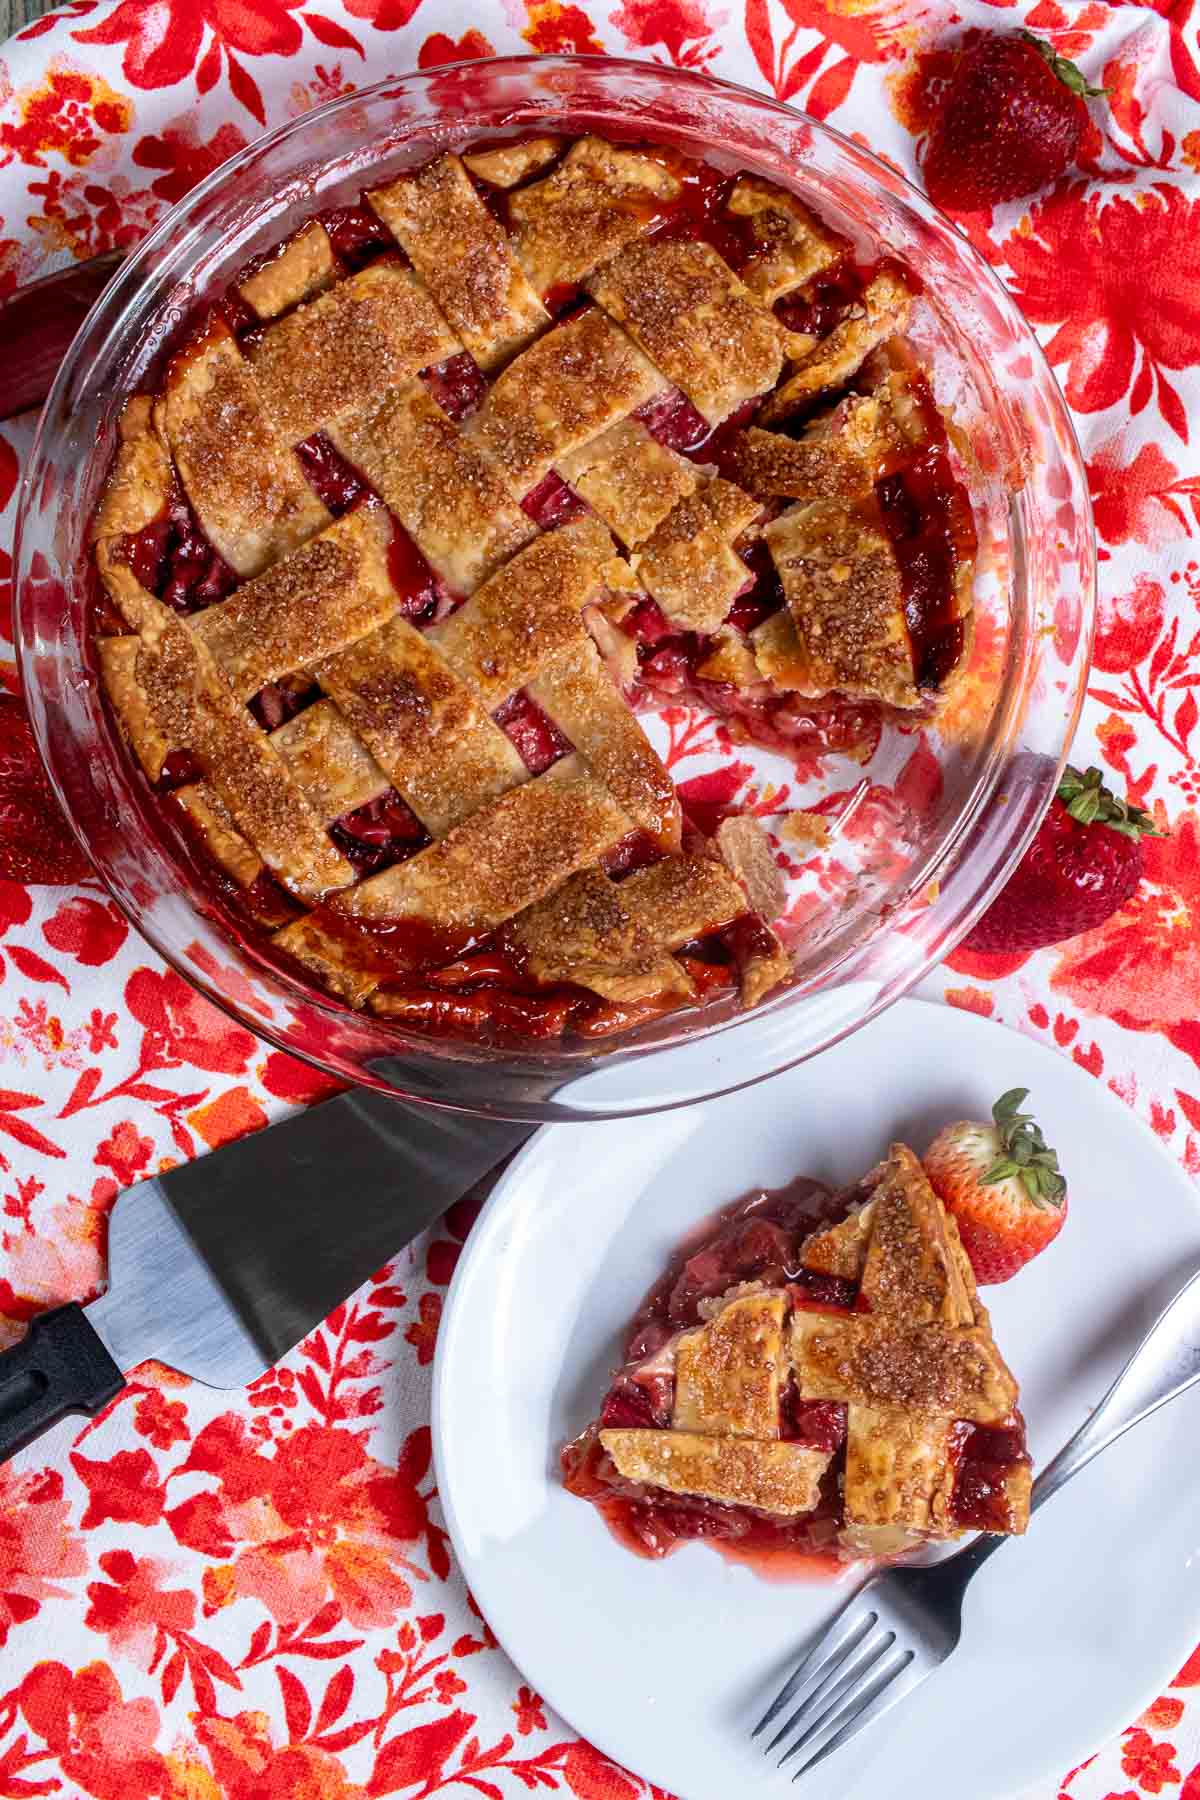 Overhead view of strawberry rhubarb lattice pie on a red and white floral cloth. One slice removed and on a white plate in front of the pie. 